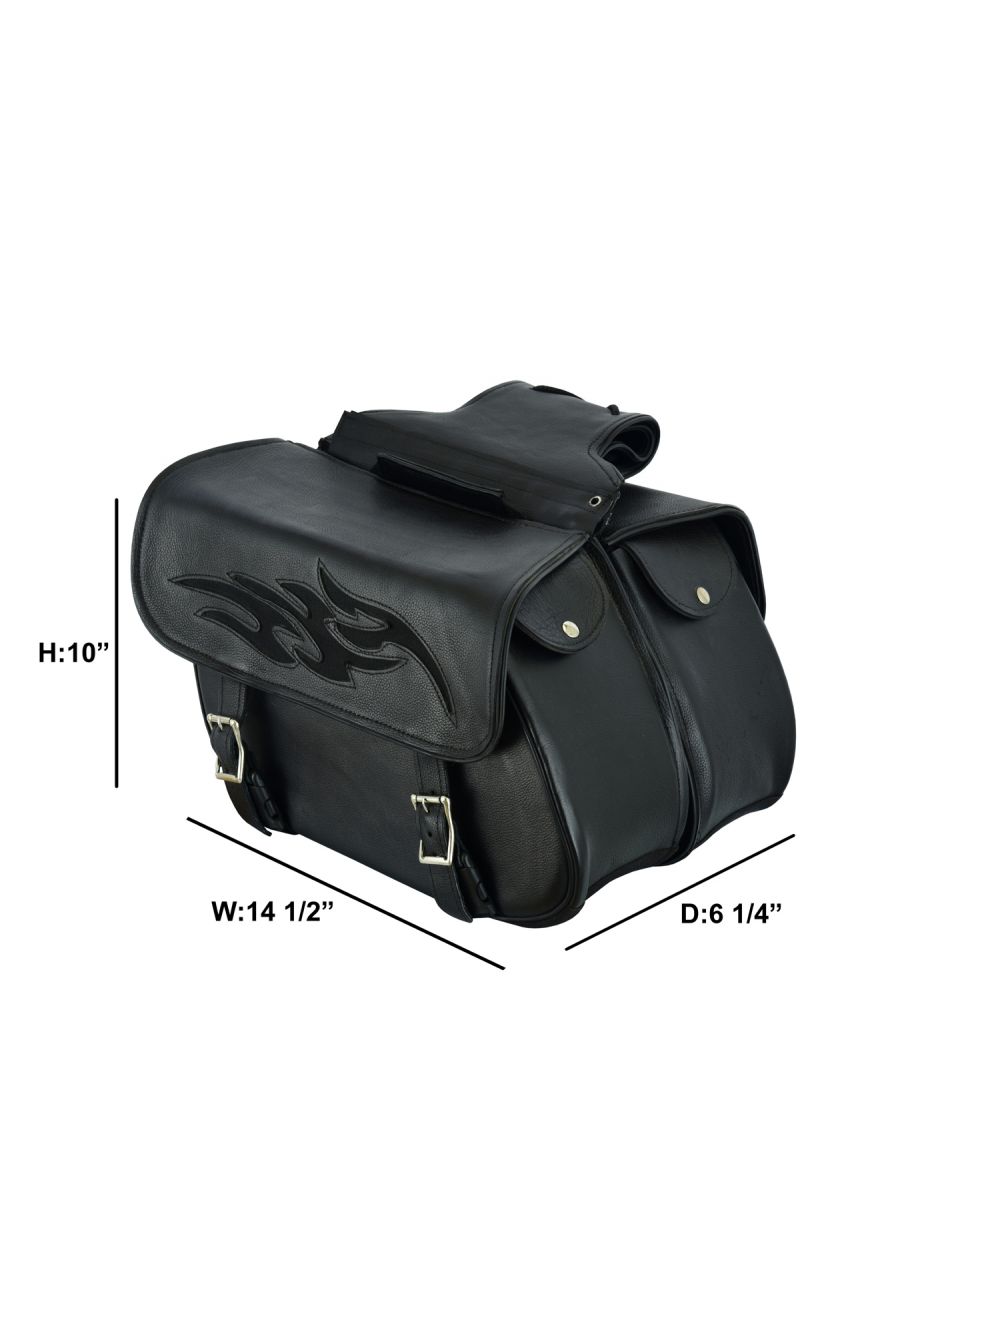 Premium Leather Saddlebags With Flames